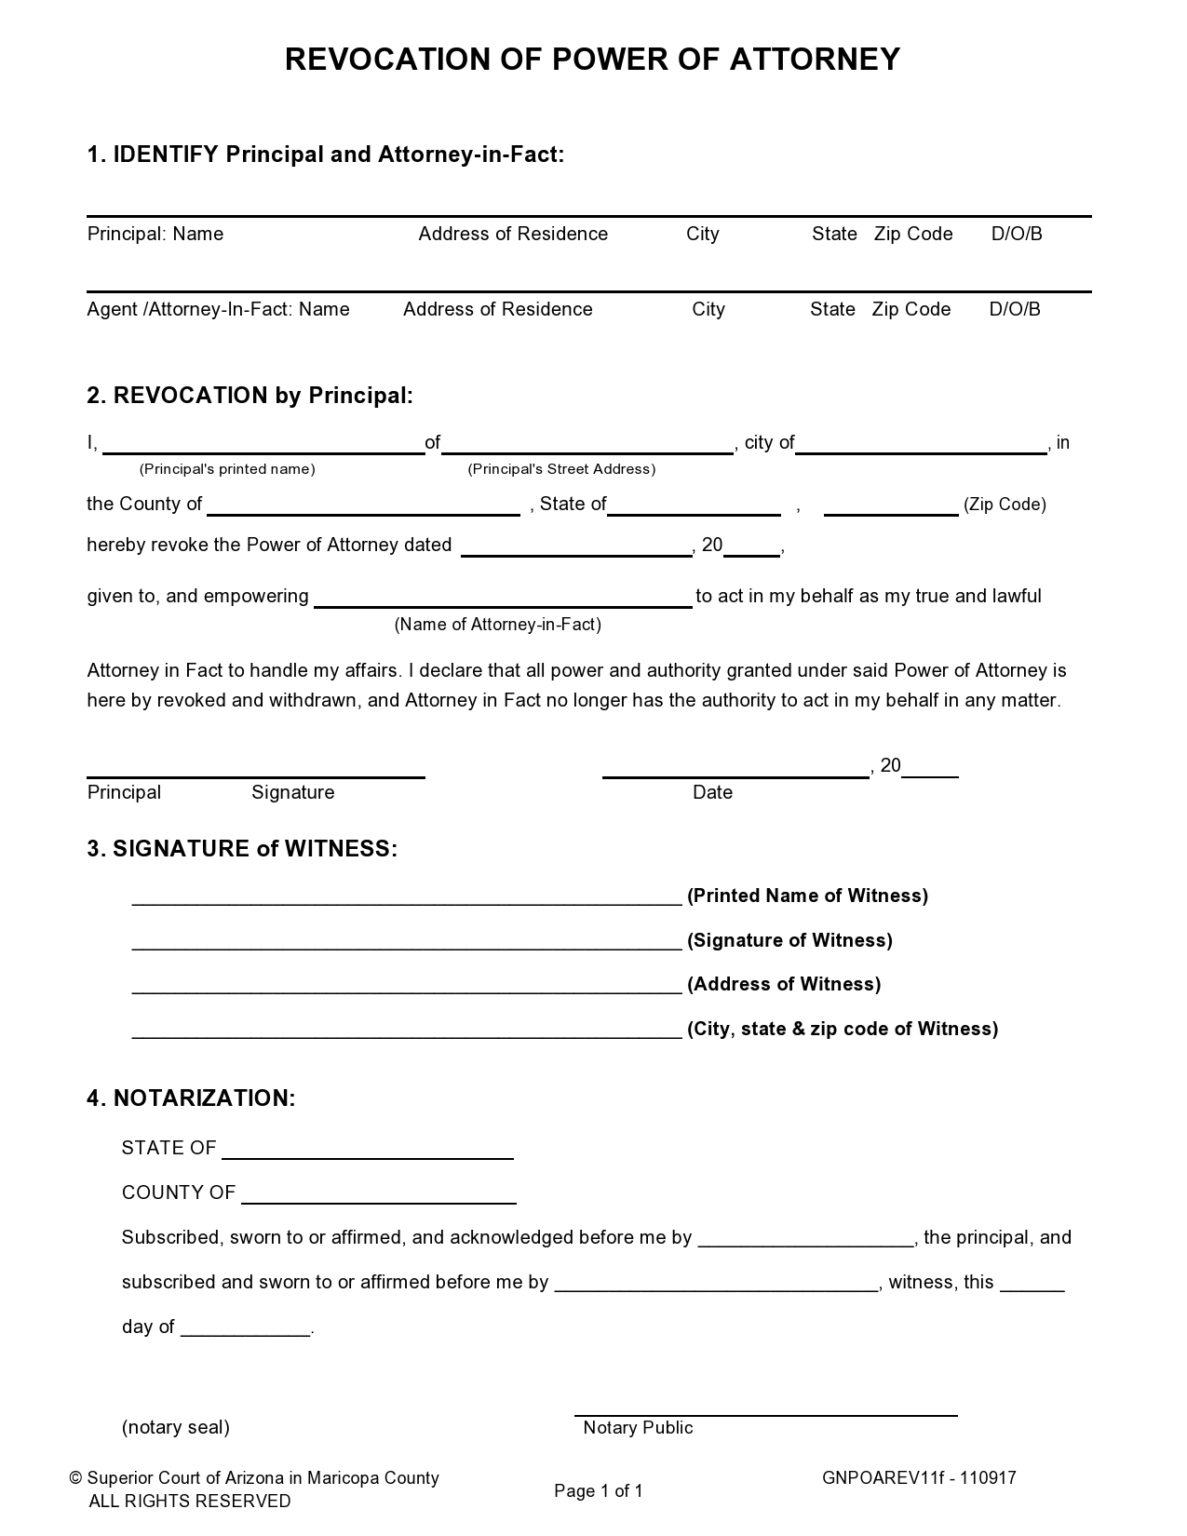 30 Free Power of Attorney Revocation Forms (Word/PDF) - TemplateArchive